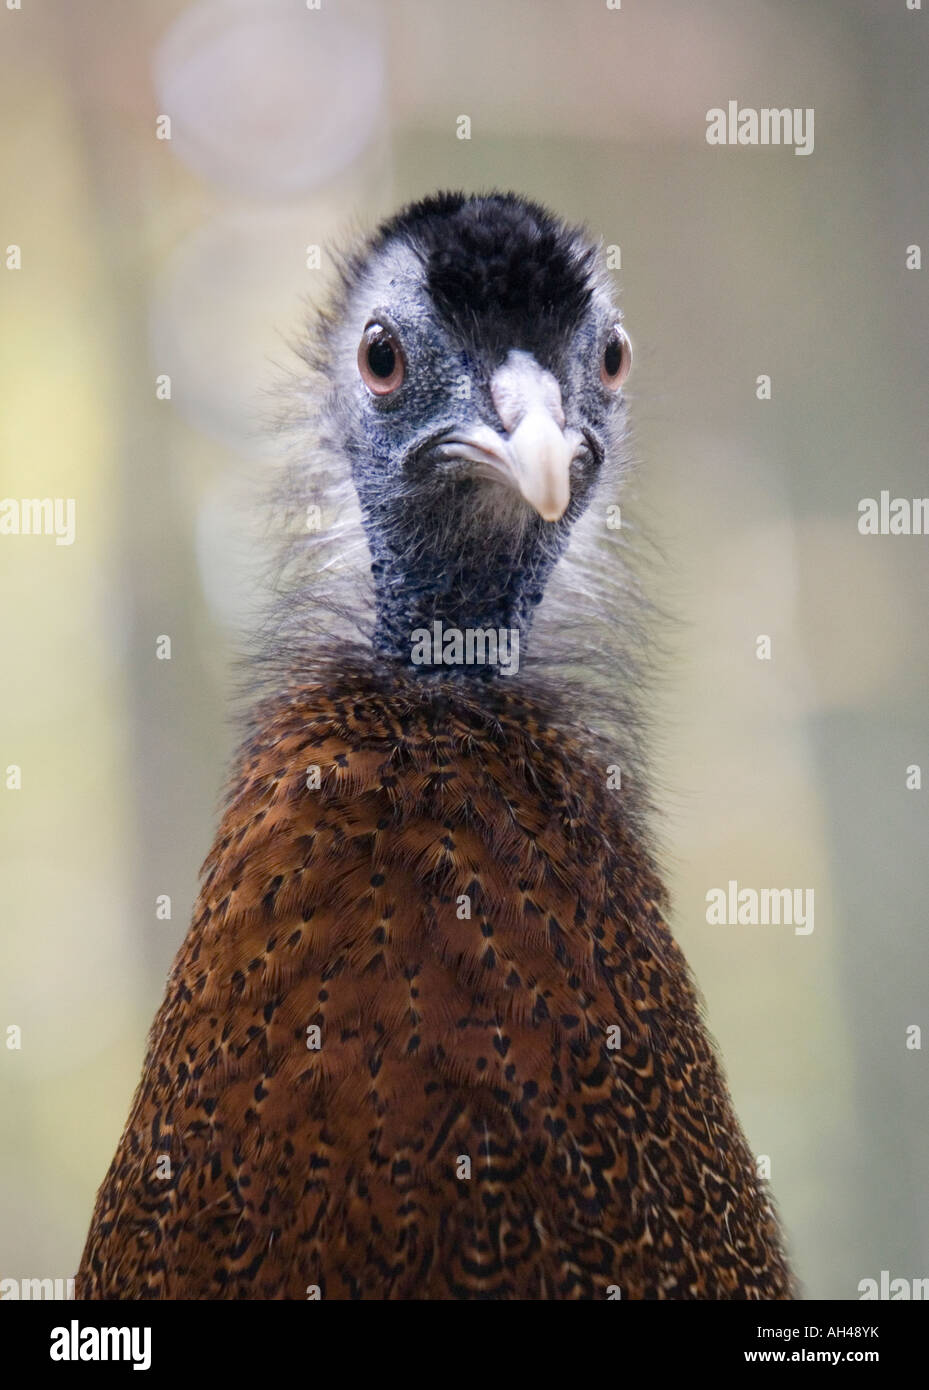 A humorous close-up portrait of a Great Argus pheasant, looking directly at the viewer. Stock Photo